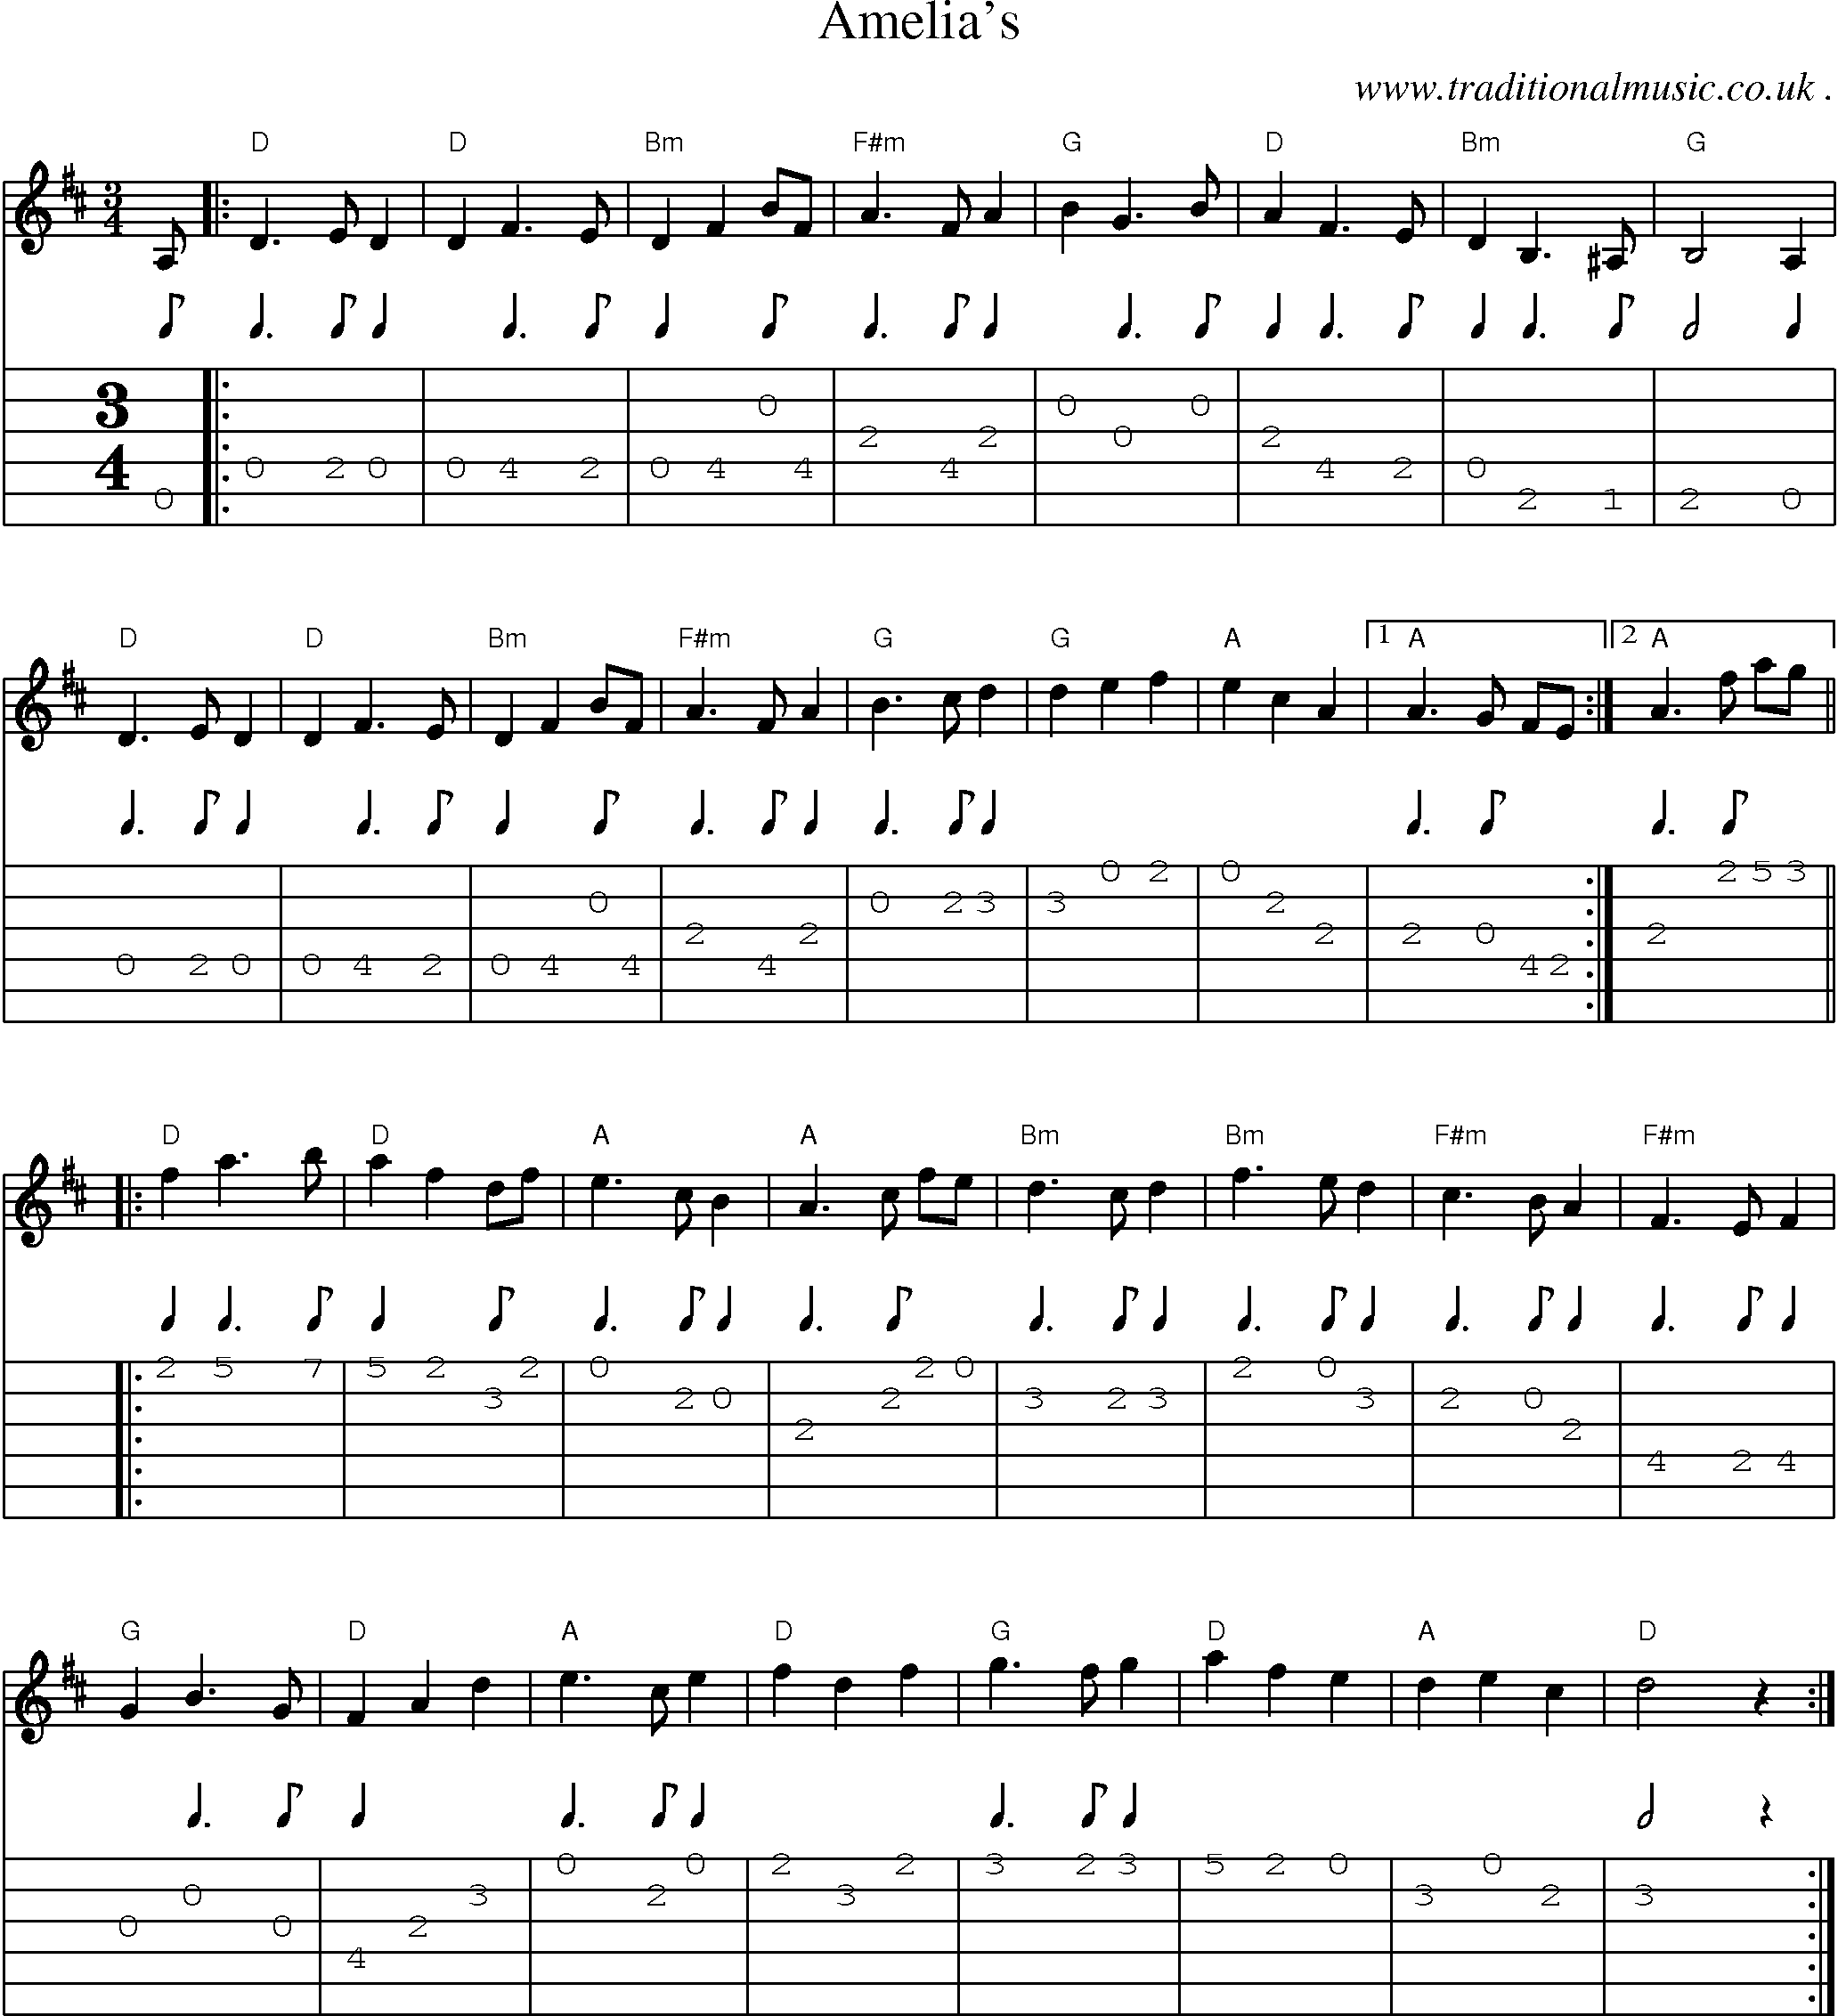 Sheet-Music and Guitar Tabs for Amelias